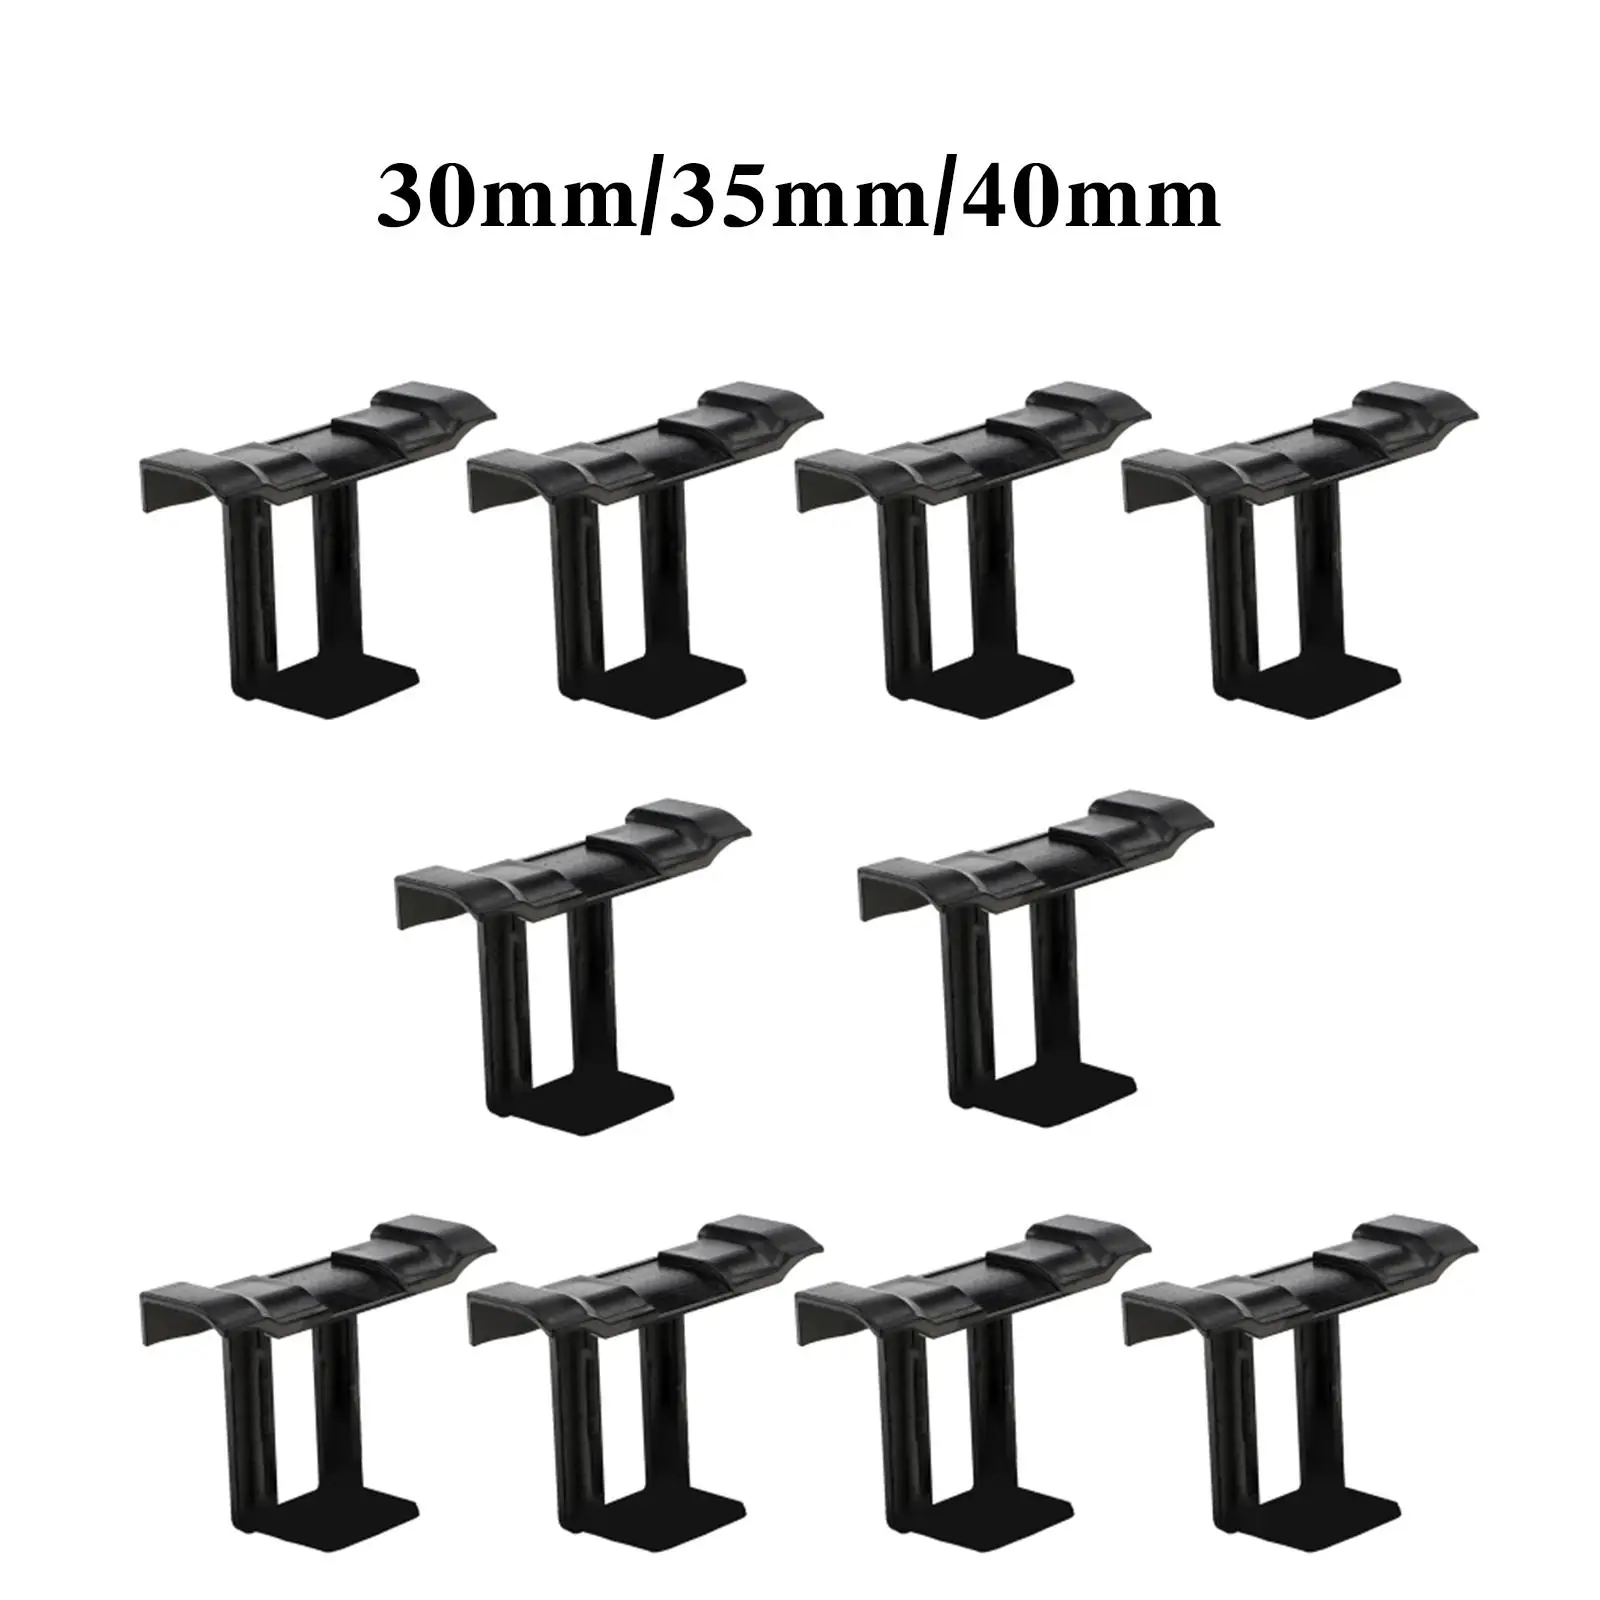 10x Solar Panel Water Drainage Clips Pv Modules Cleaning Clips Photovoltaic Clip